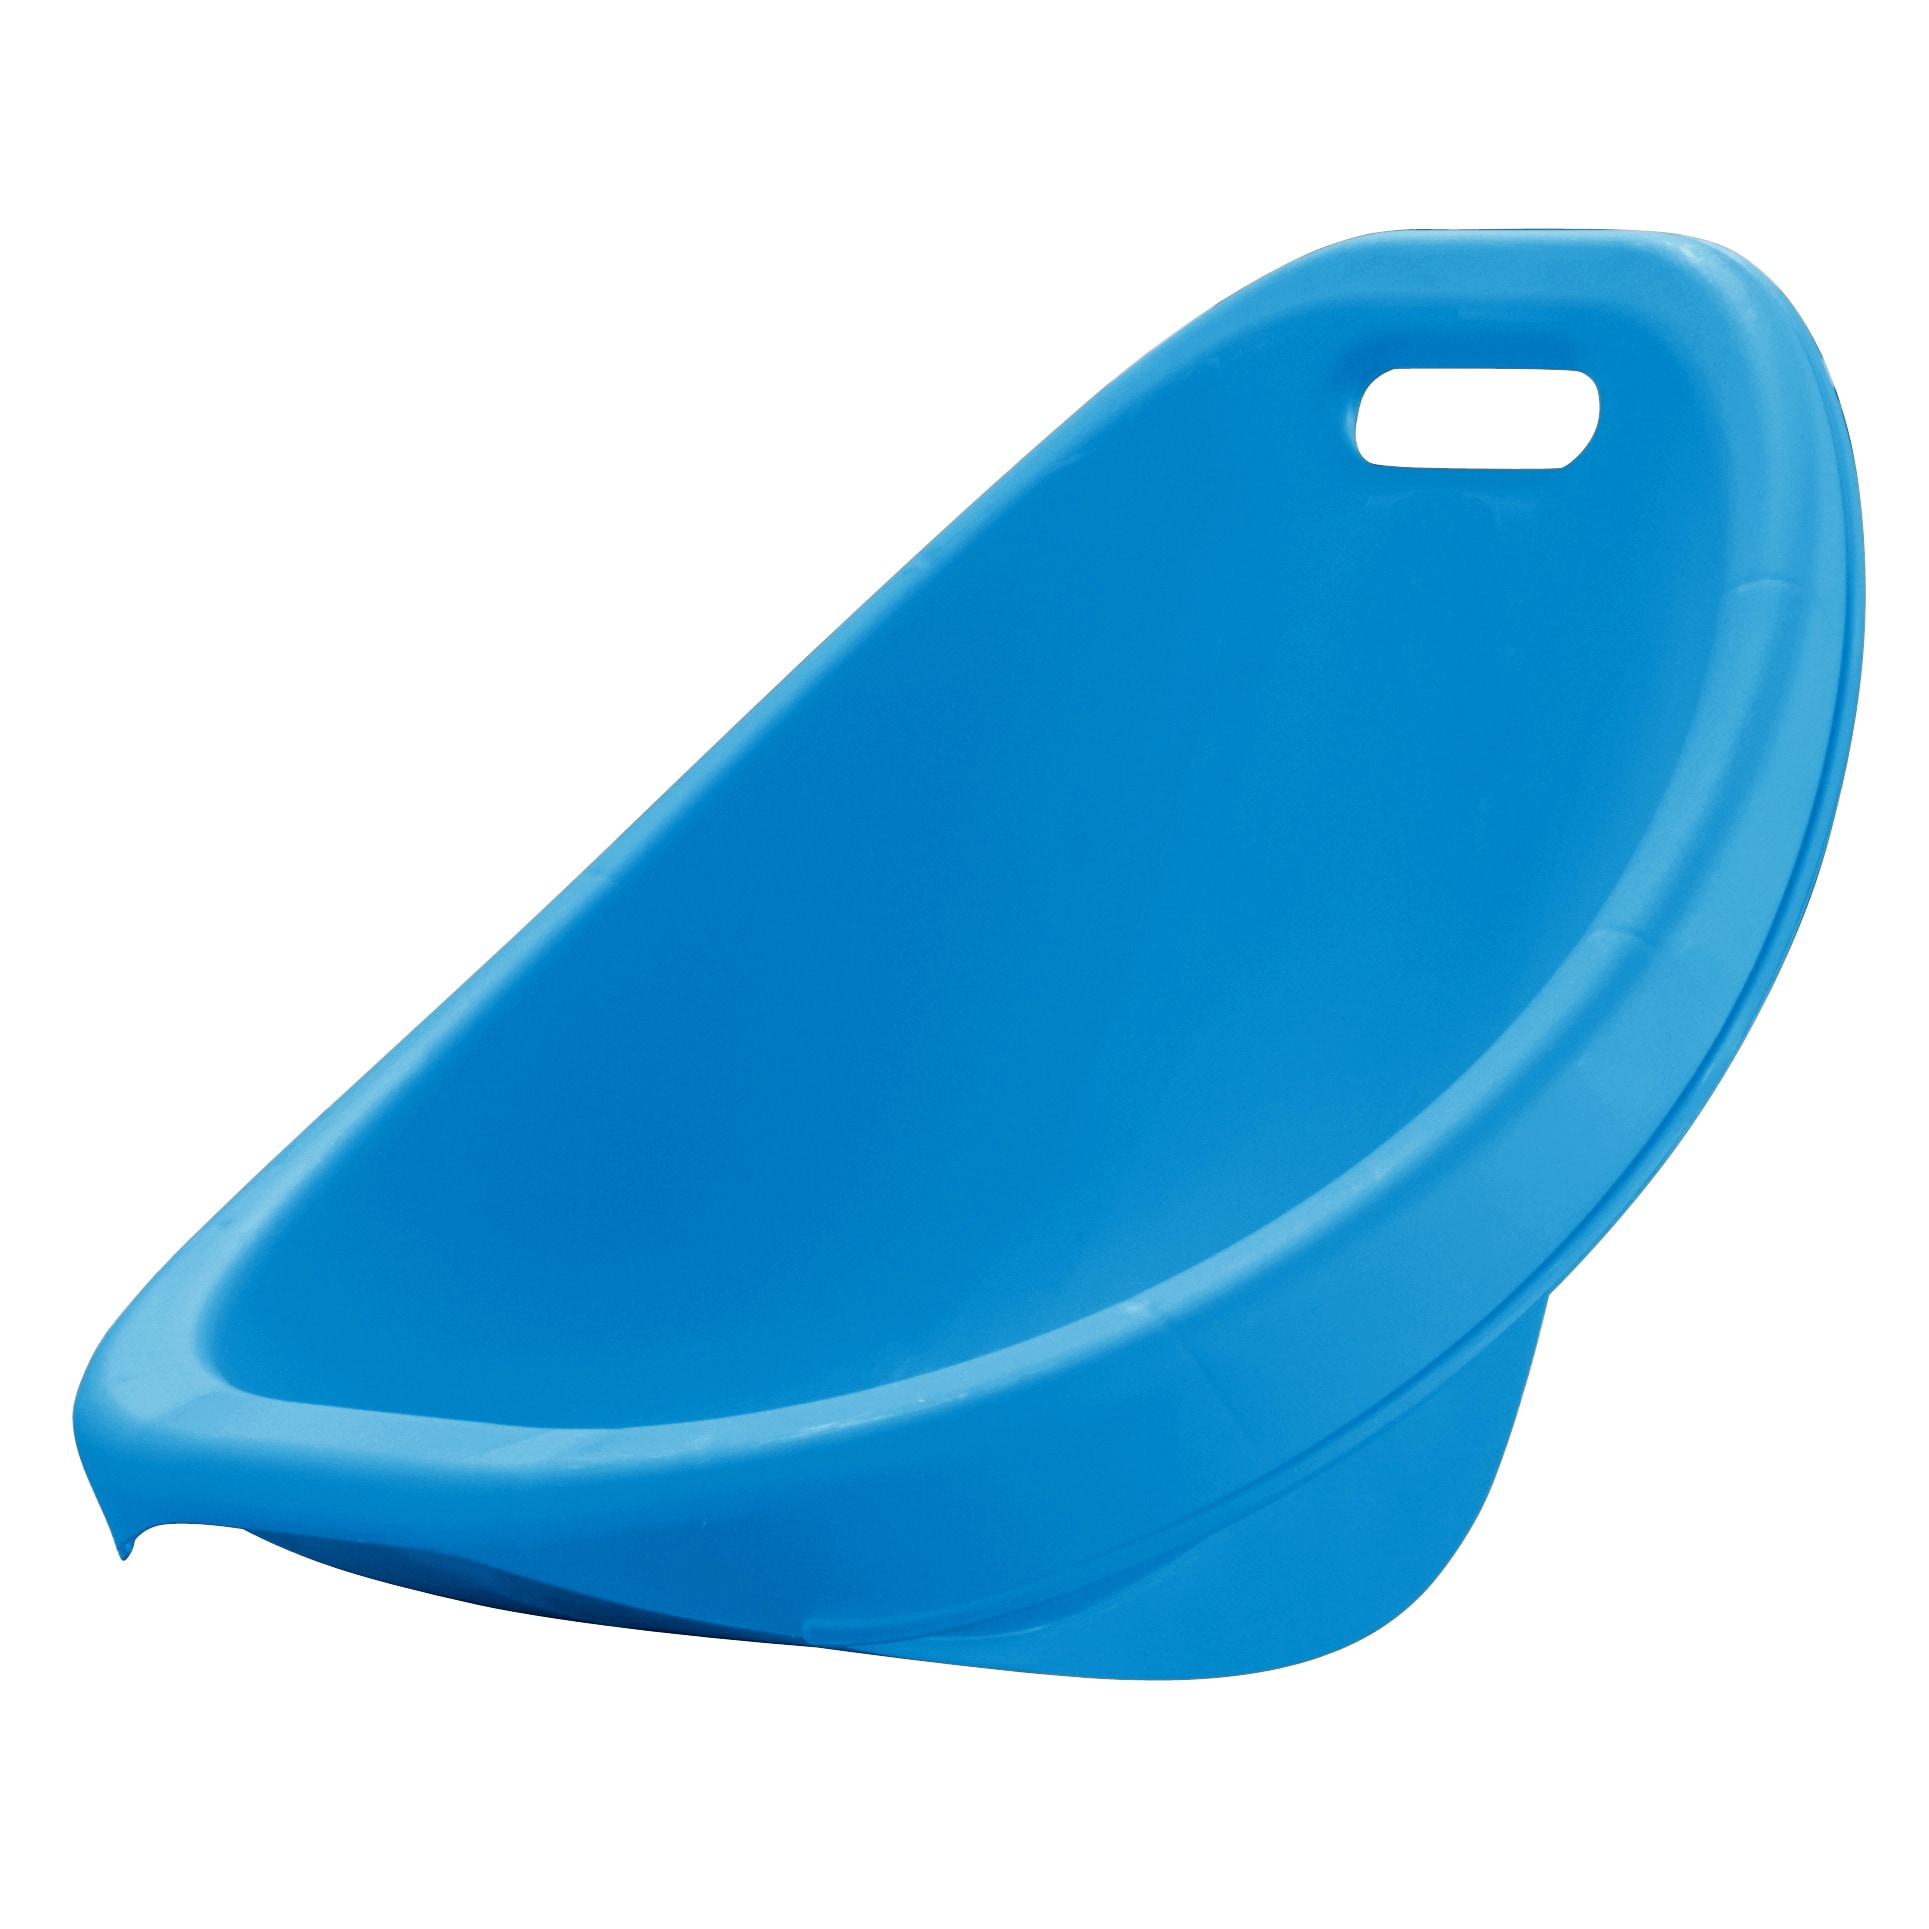 Kid's Scoop Rocker, Assorted Red or Blue, Ages 3-8, Mardel